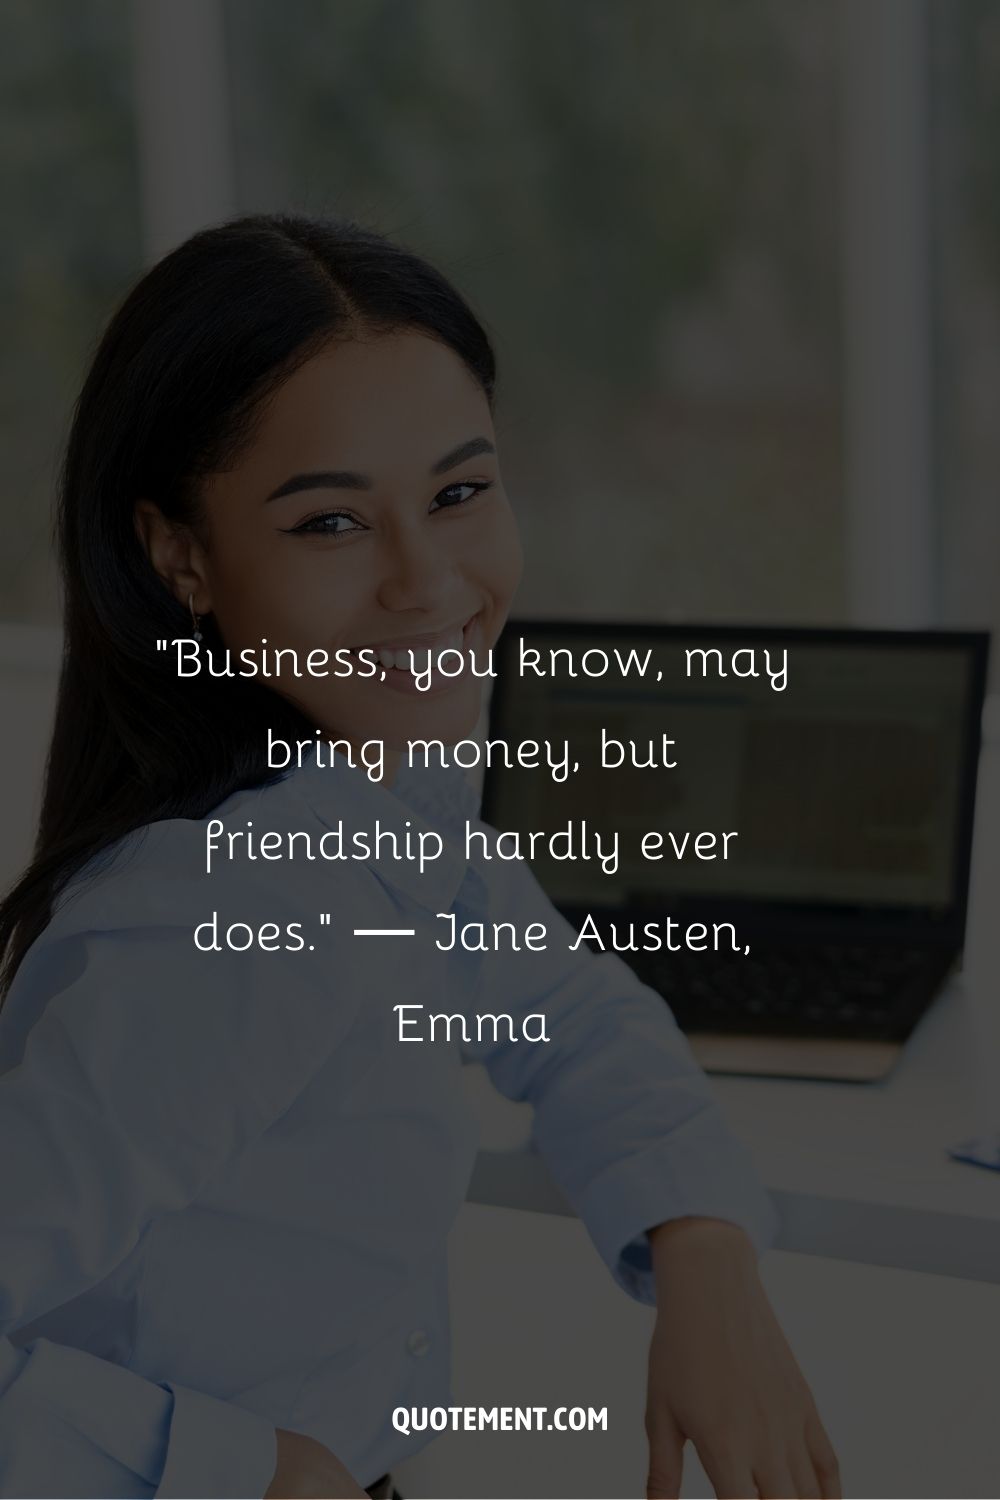 “Business, you know, may bring money, but friendship hardly ever does.” ― Jane Austen, Emma